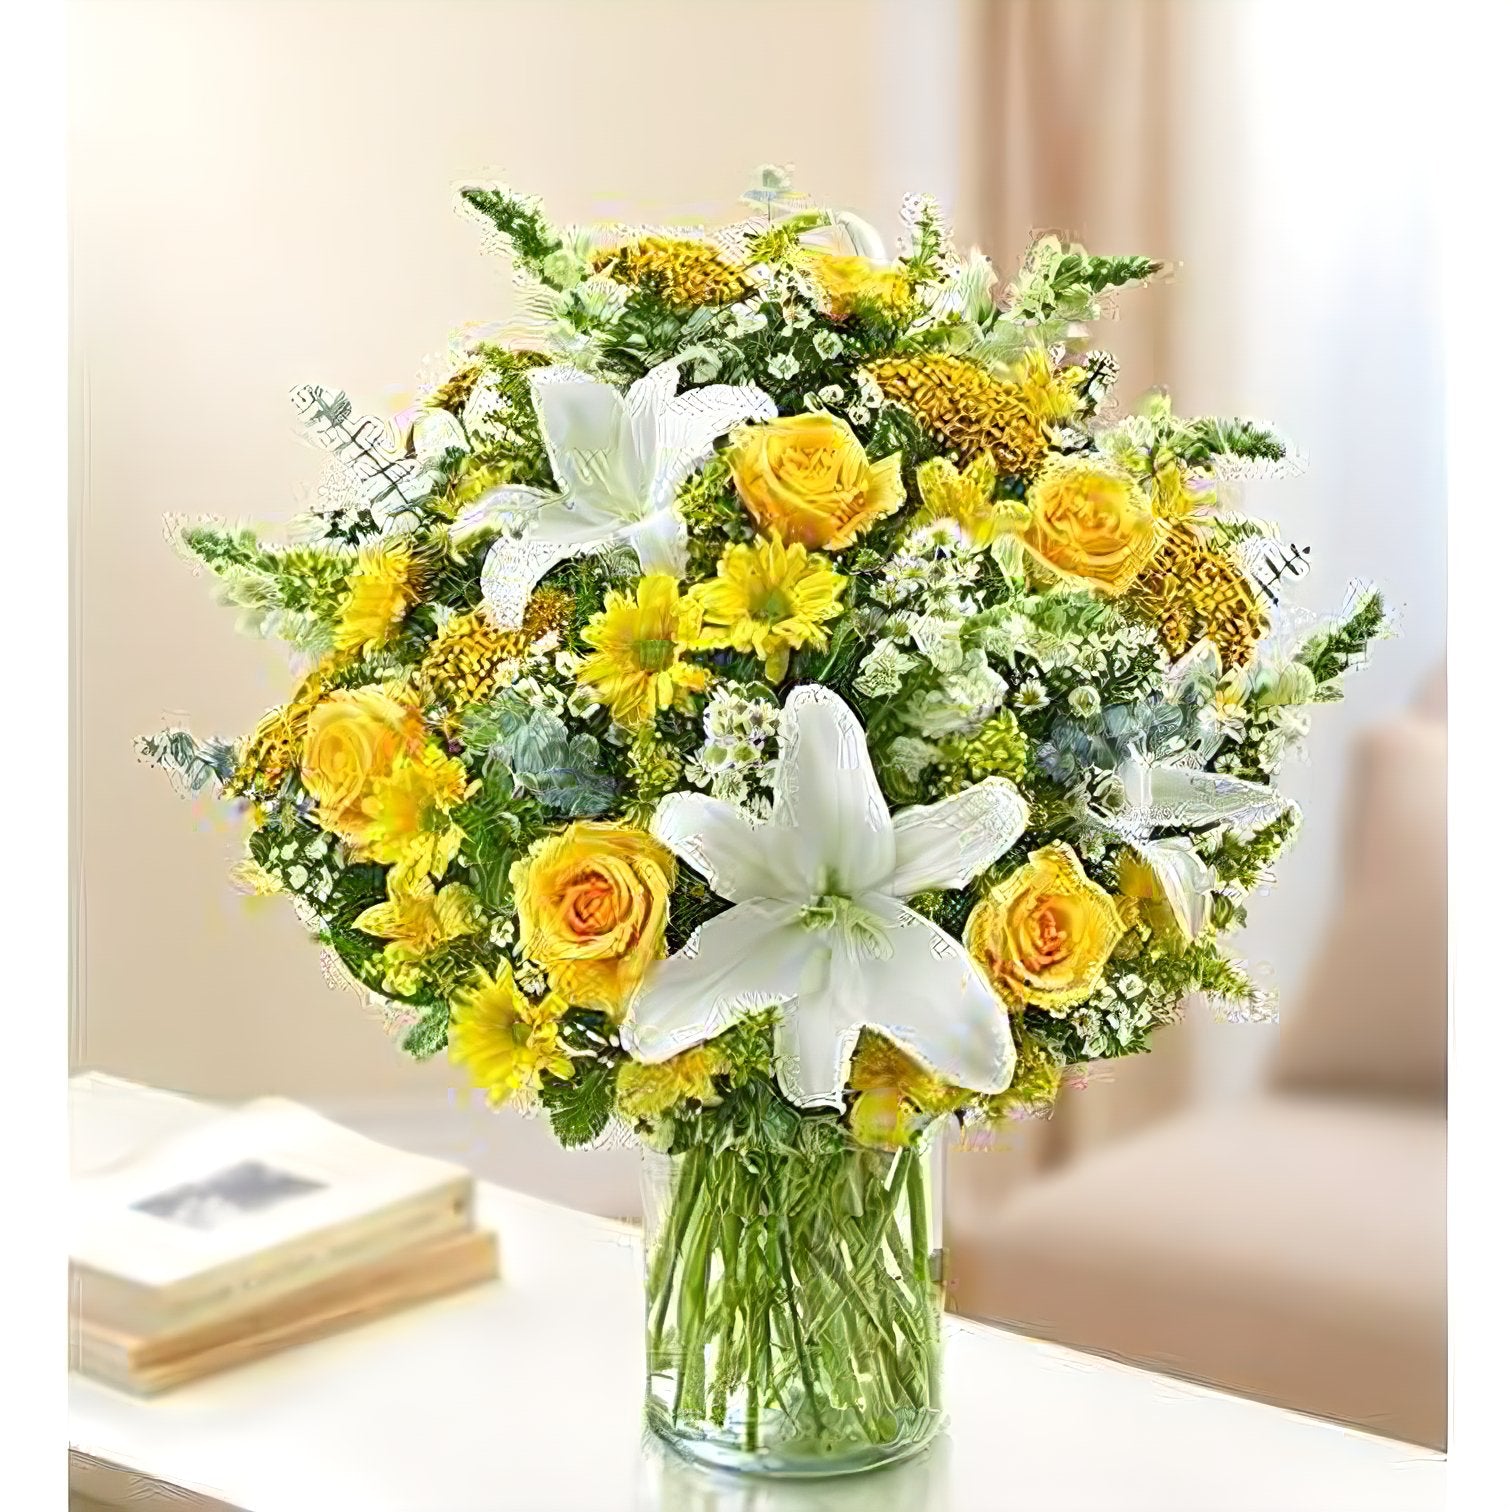 Sincerest Sorrow - Yellow and White - Funeral > Vase Arrangements - Queens Flower Delivery